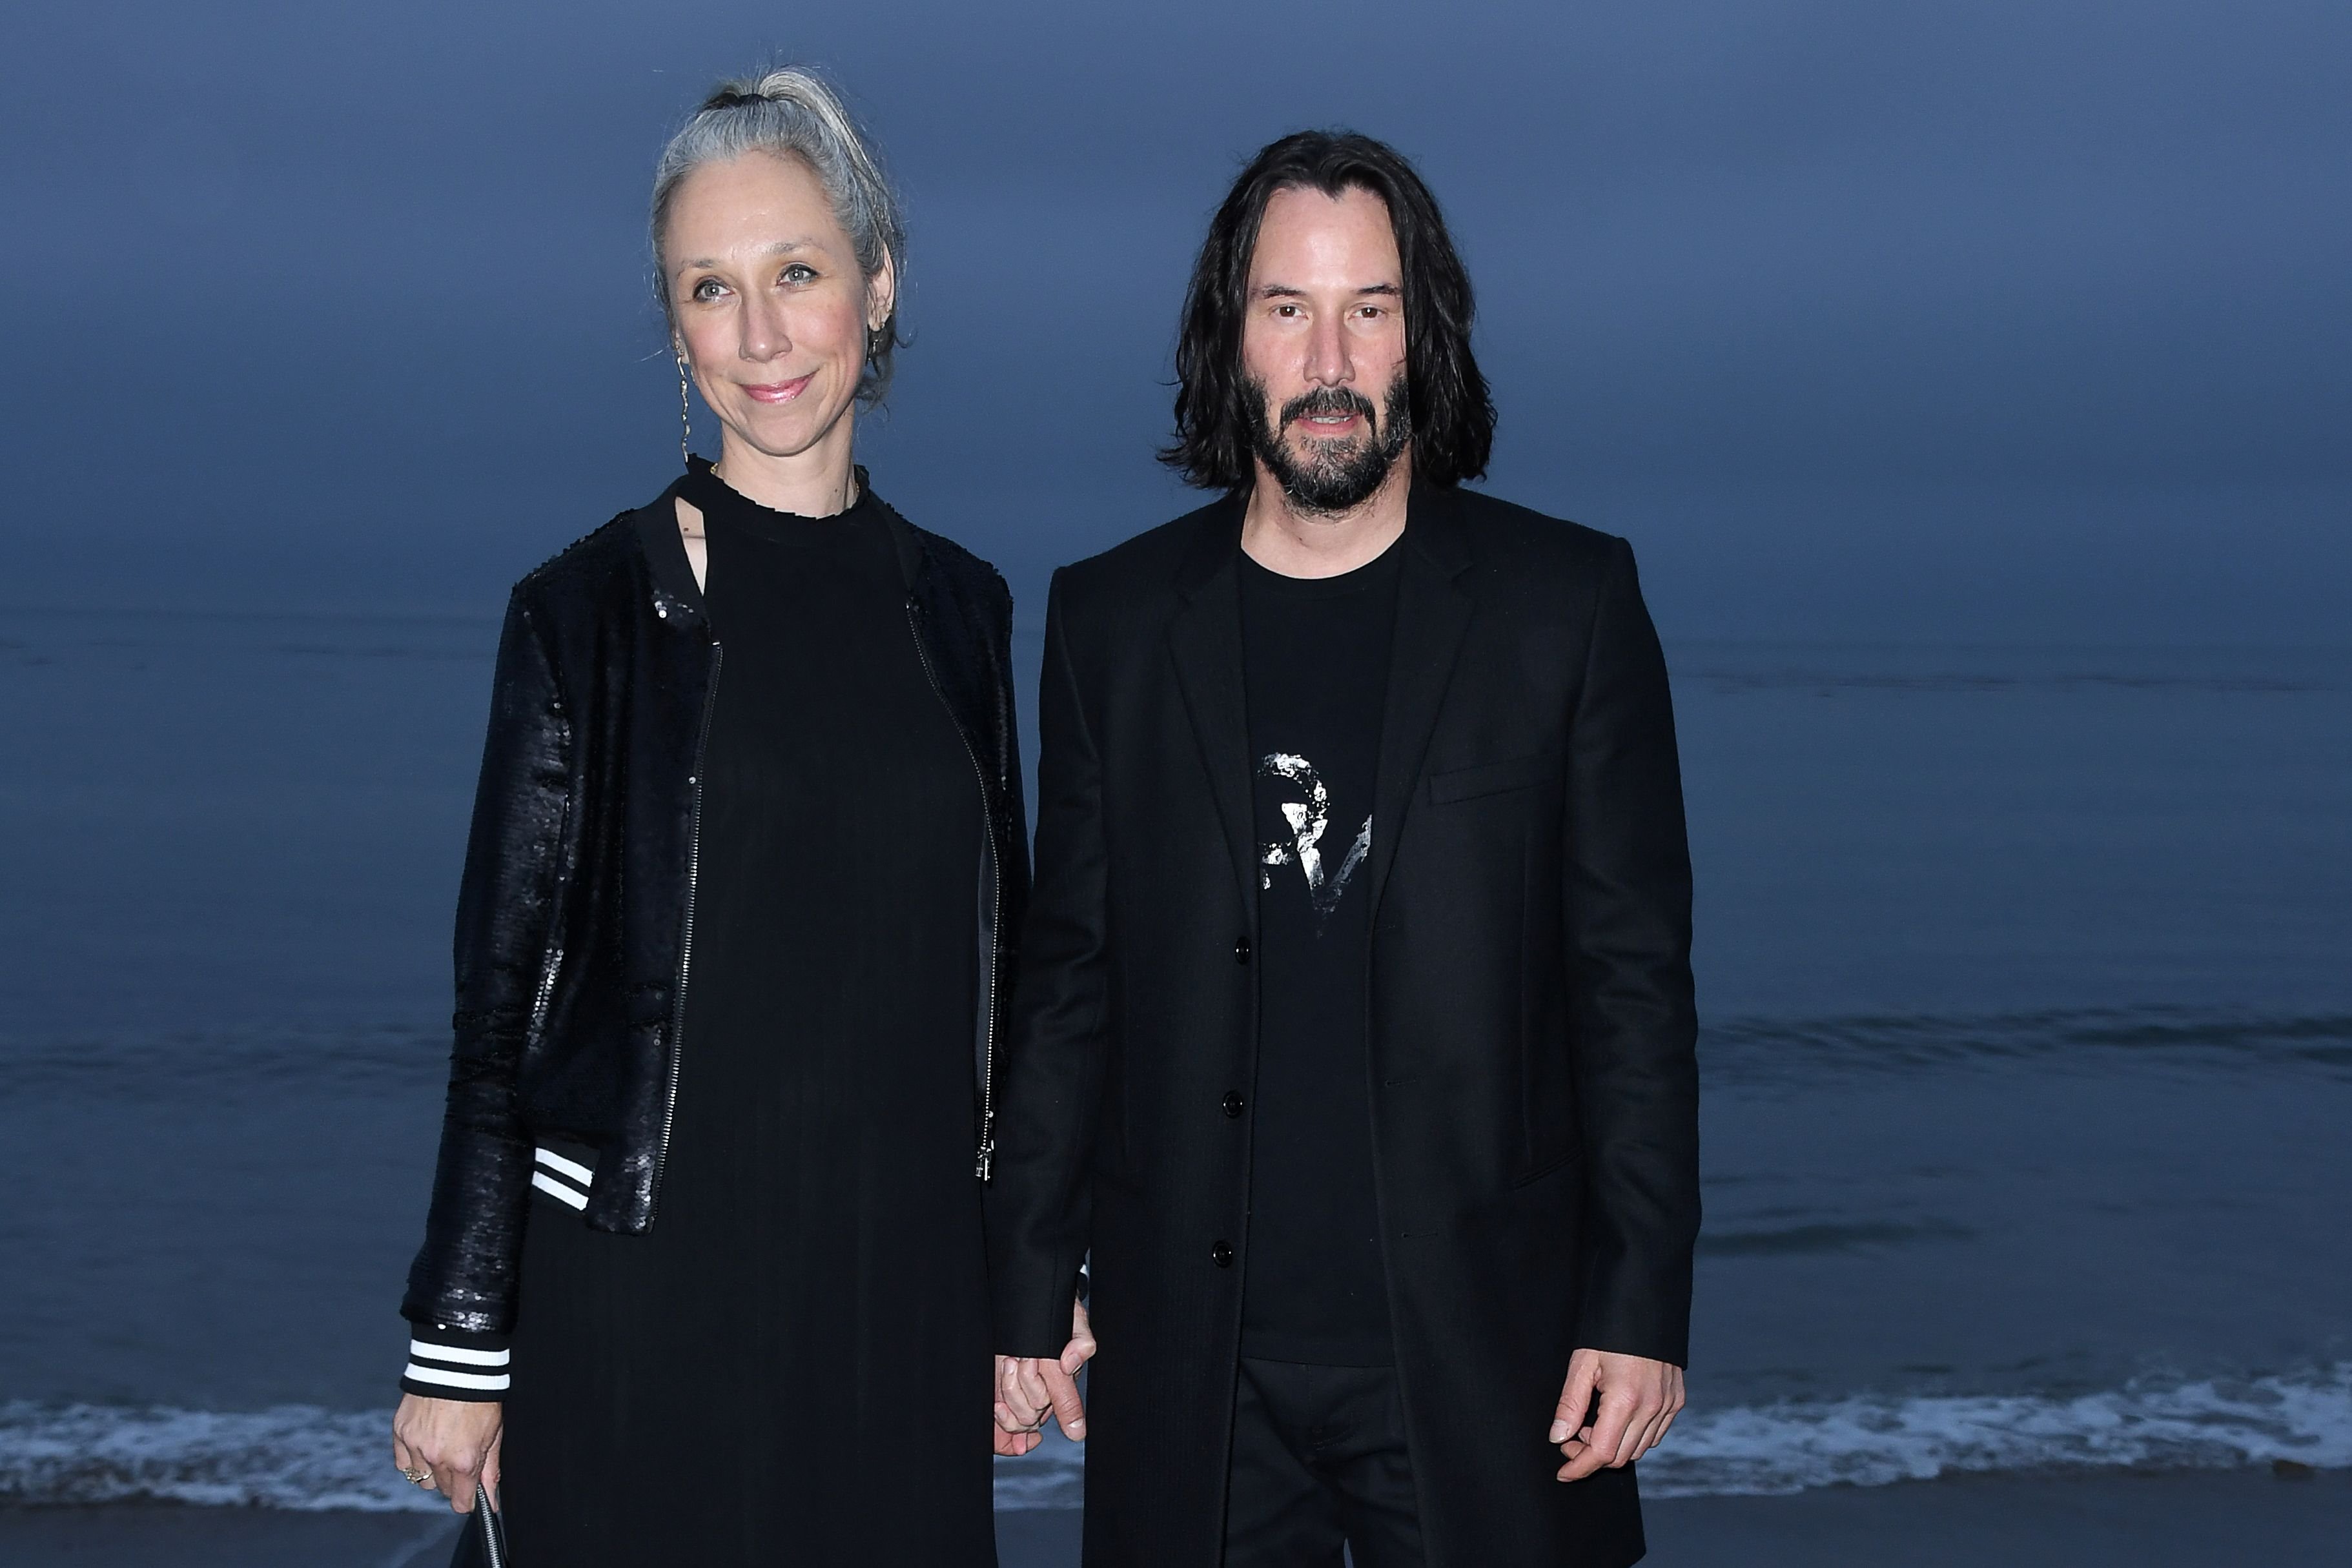 Keanu Reeves and Alexandra Grant arriving for the Saint Laurent Men's Spring-Summer 2020 runway show on June 6, 2019 in Malibu, California. / Source: Getty Images